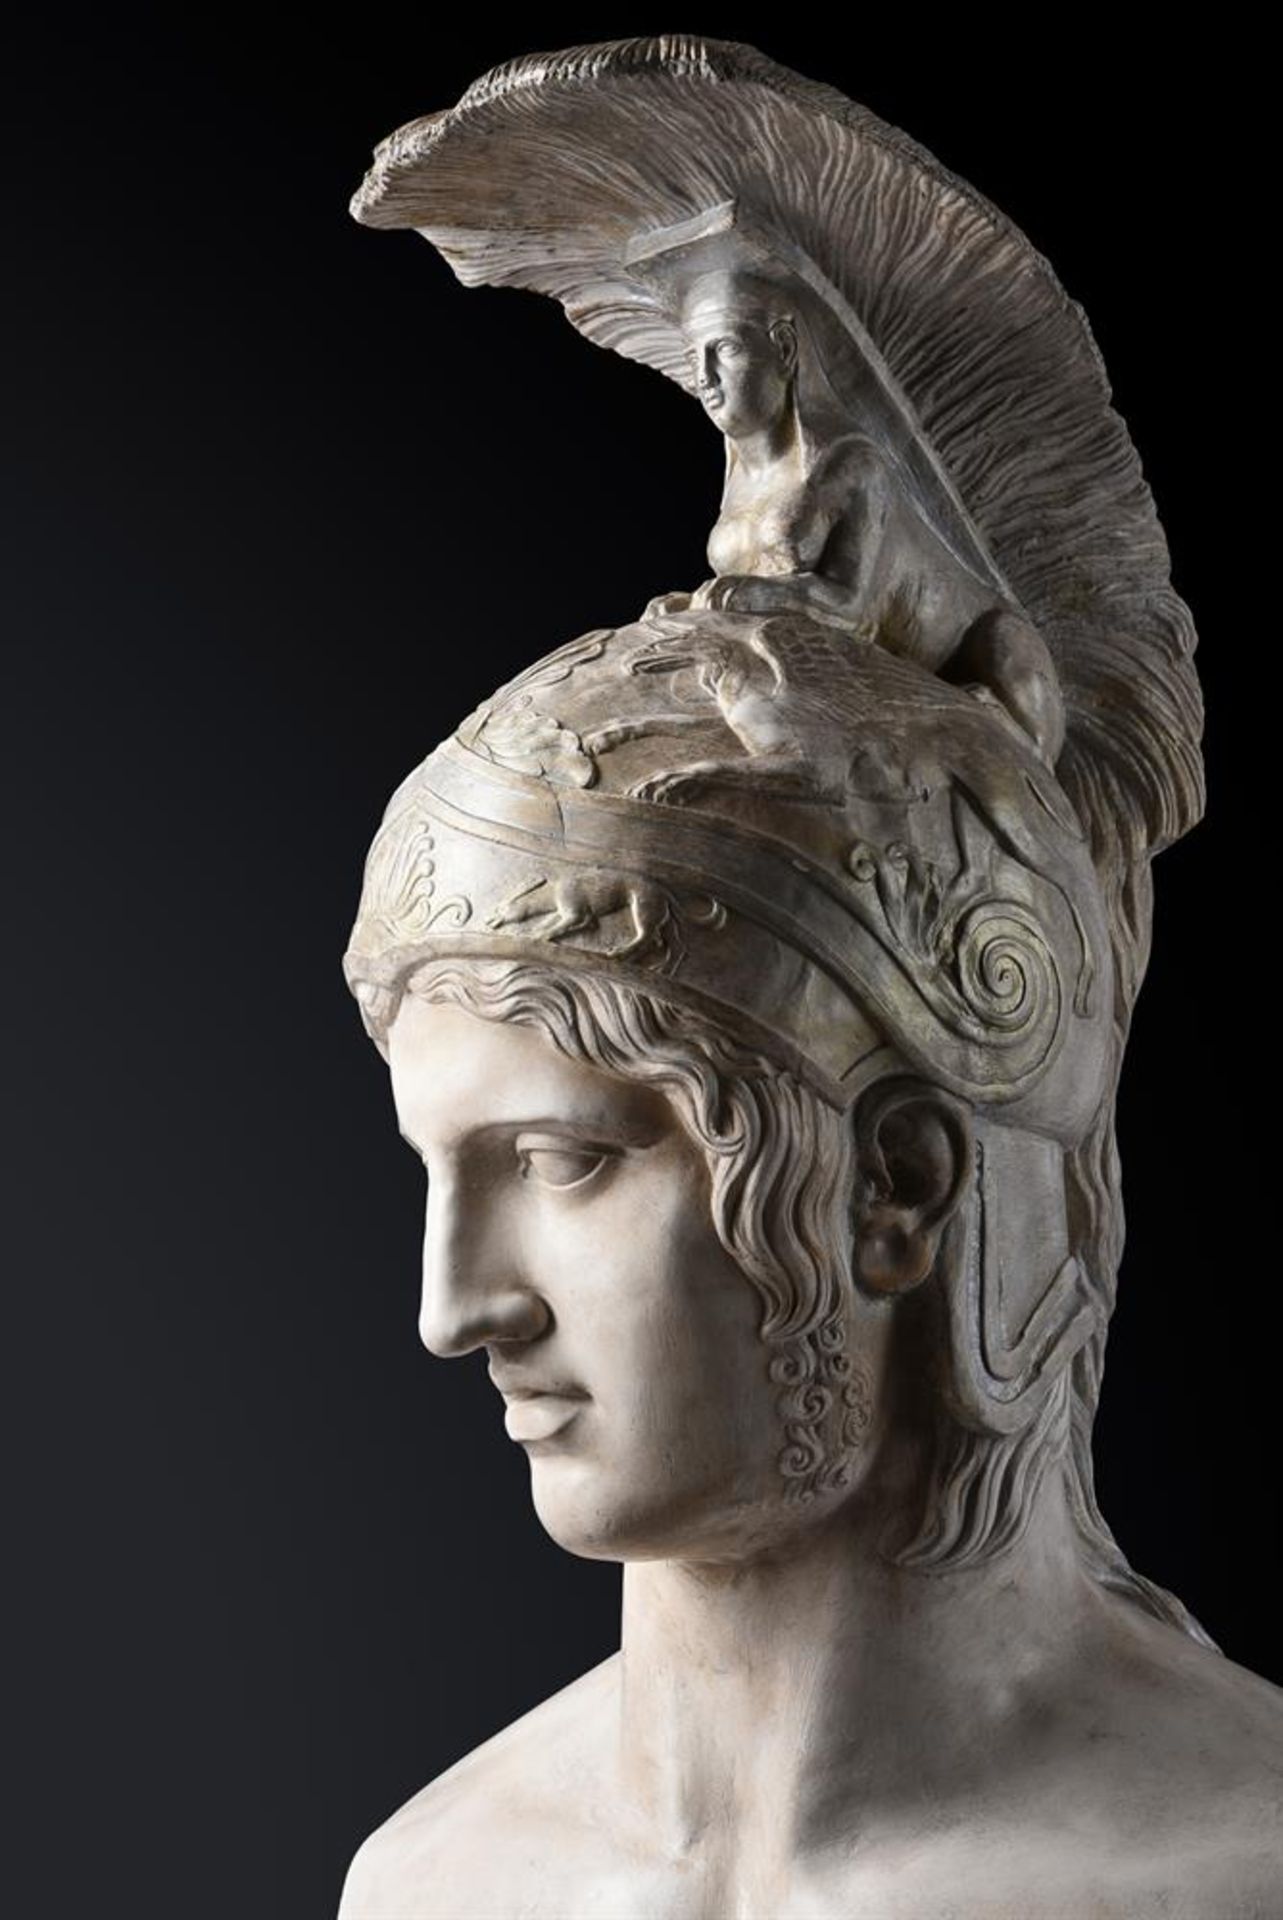 A LARGE PLASTER BUST OF ARES, THE GOD OF WAR, 20TH CENTURY, IN THE MANNER OF BRUCCIANI - Image 2 of 5